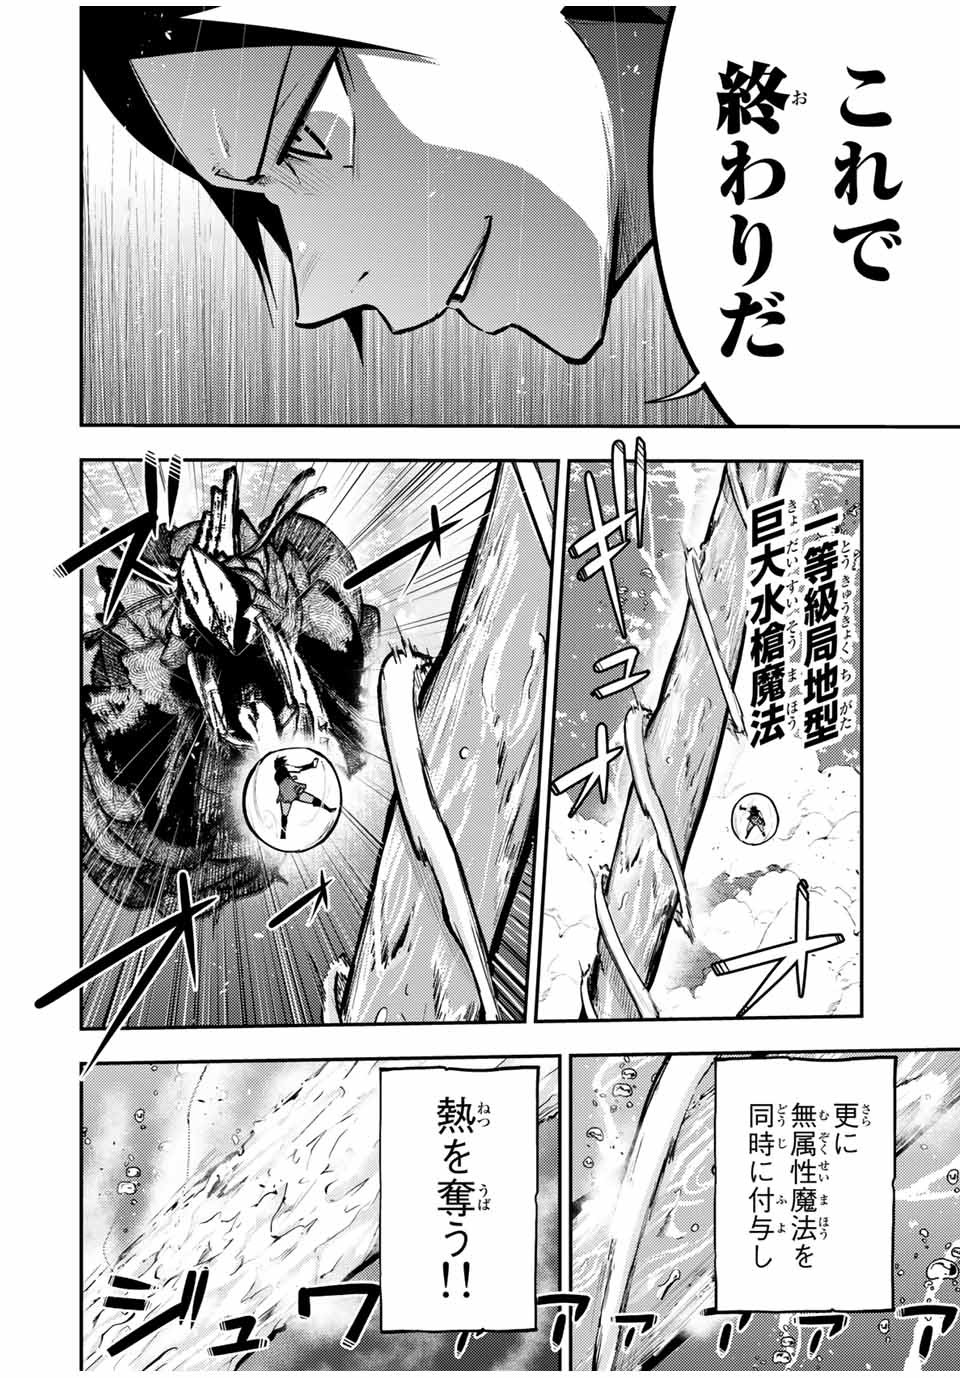 the strongest former prince-; 奴隷転生 ～その奴隷、最強の元王子につき～ 第40話 - Page 14